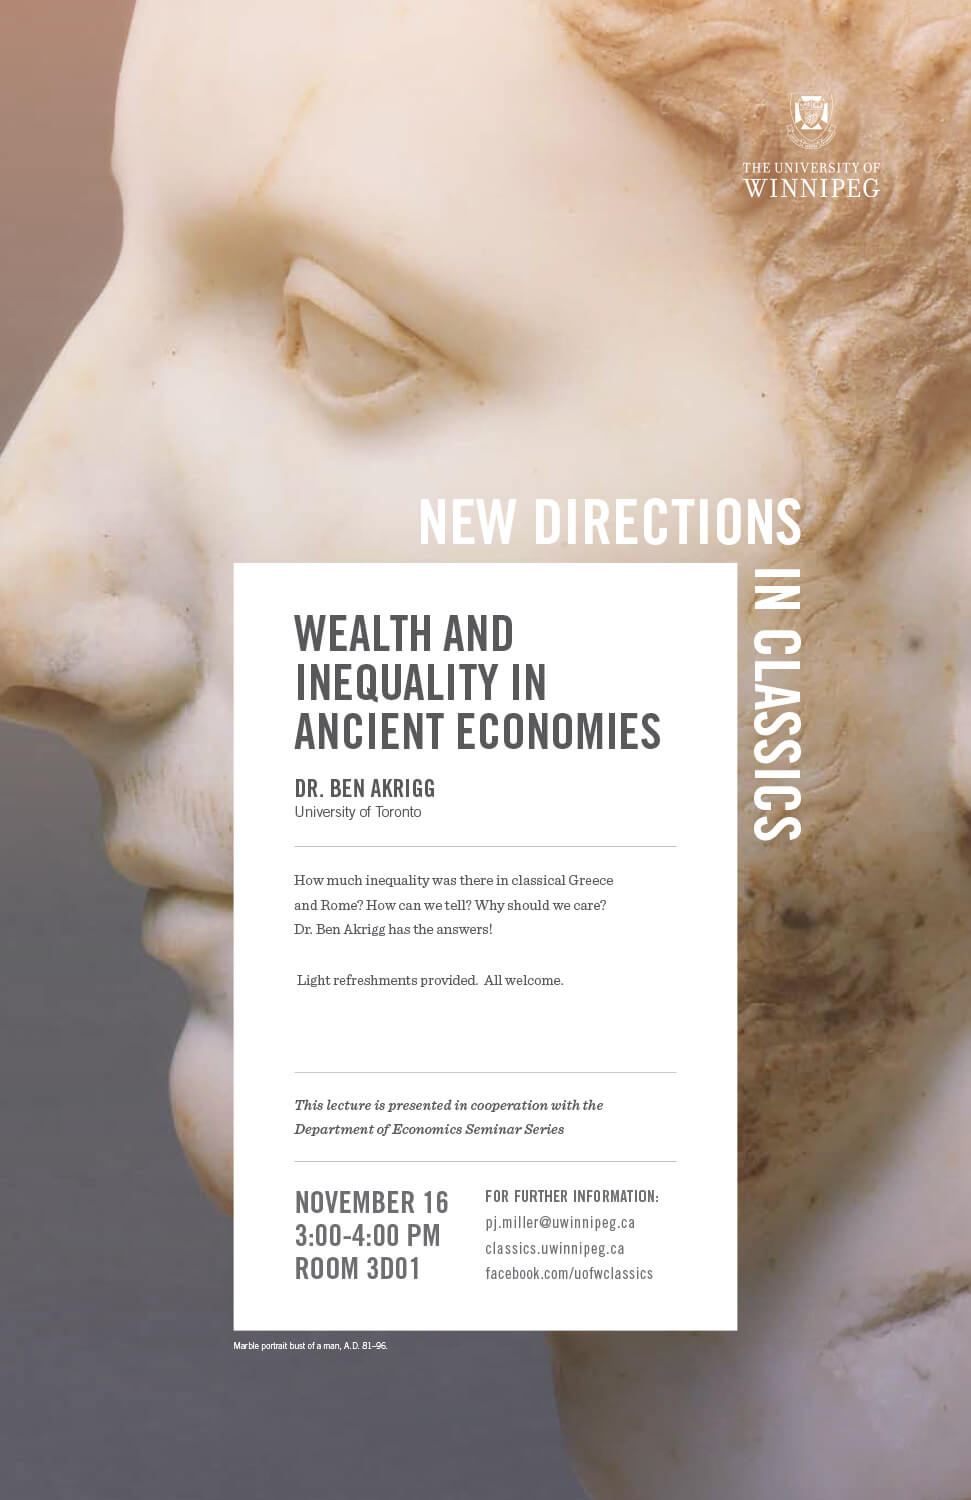 Promotional poster for Dr. Ben Akrigg's New Directions in Classics Lecture, November 26, 2018 (text on web page)